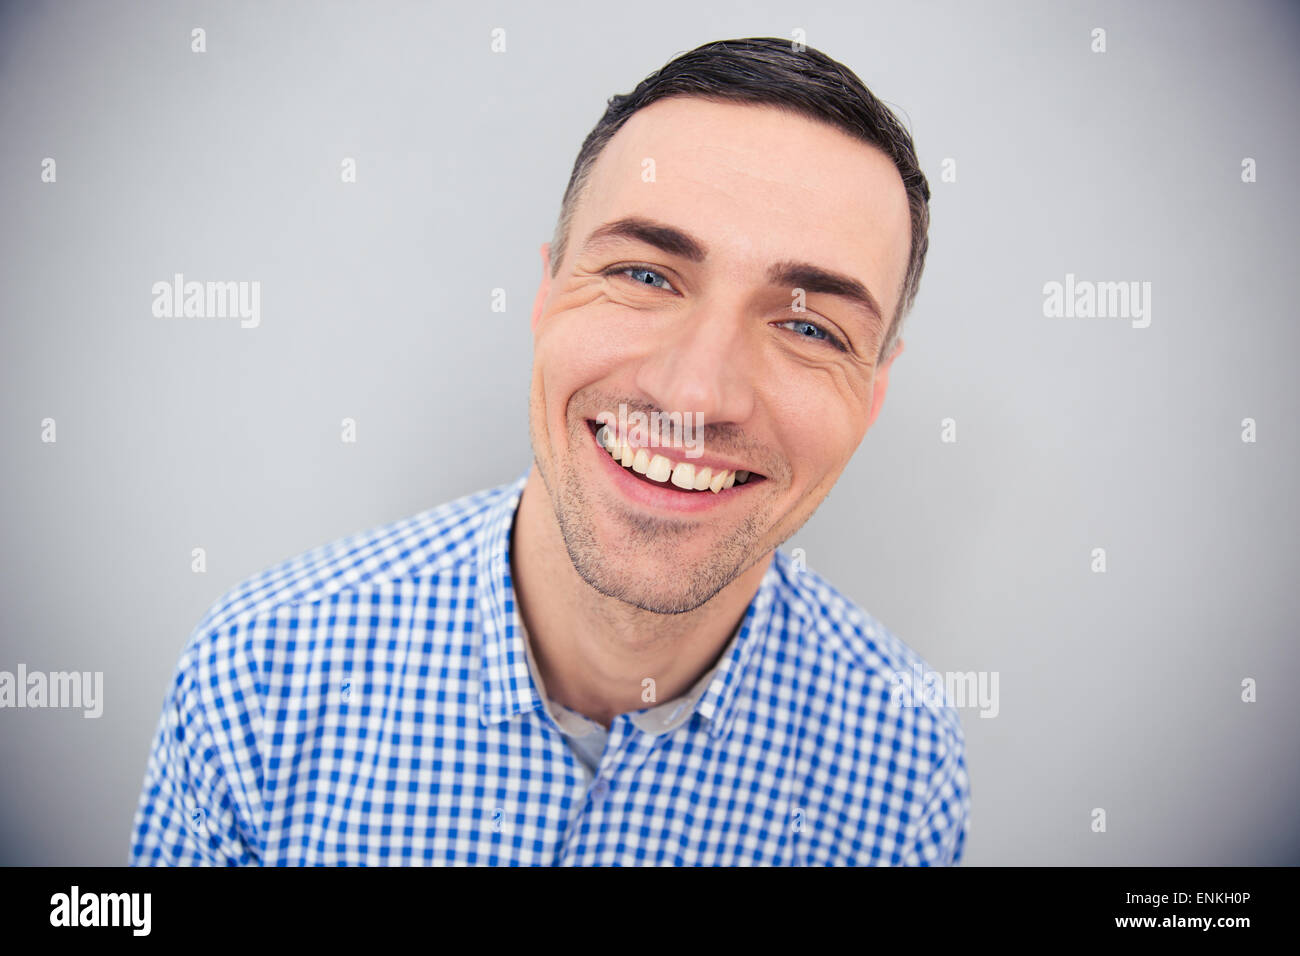 Portrait of a cheerful man looking at camera over gray background Stock Photo